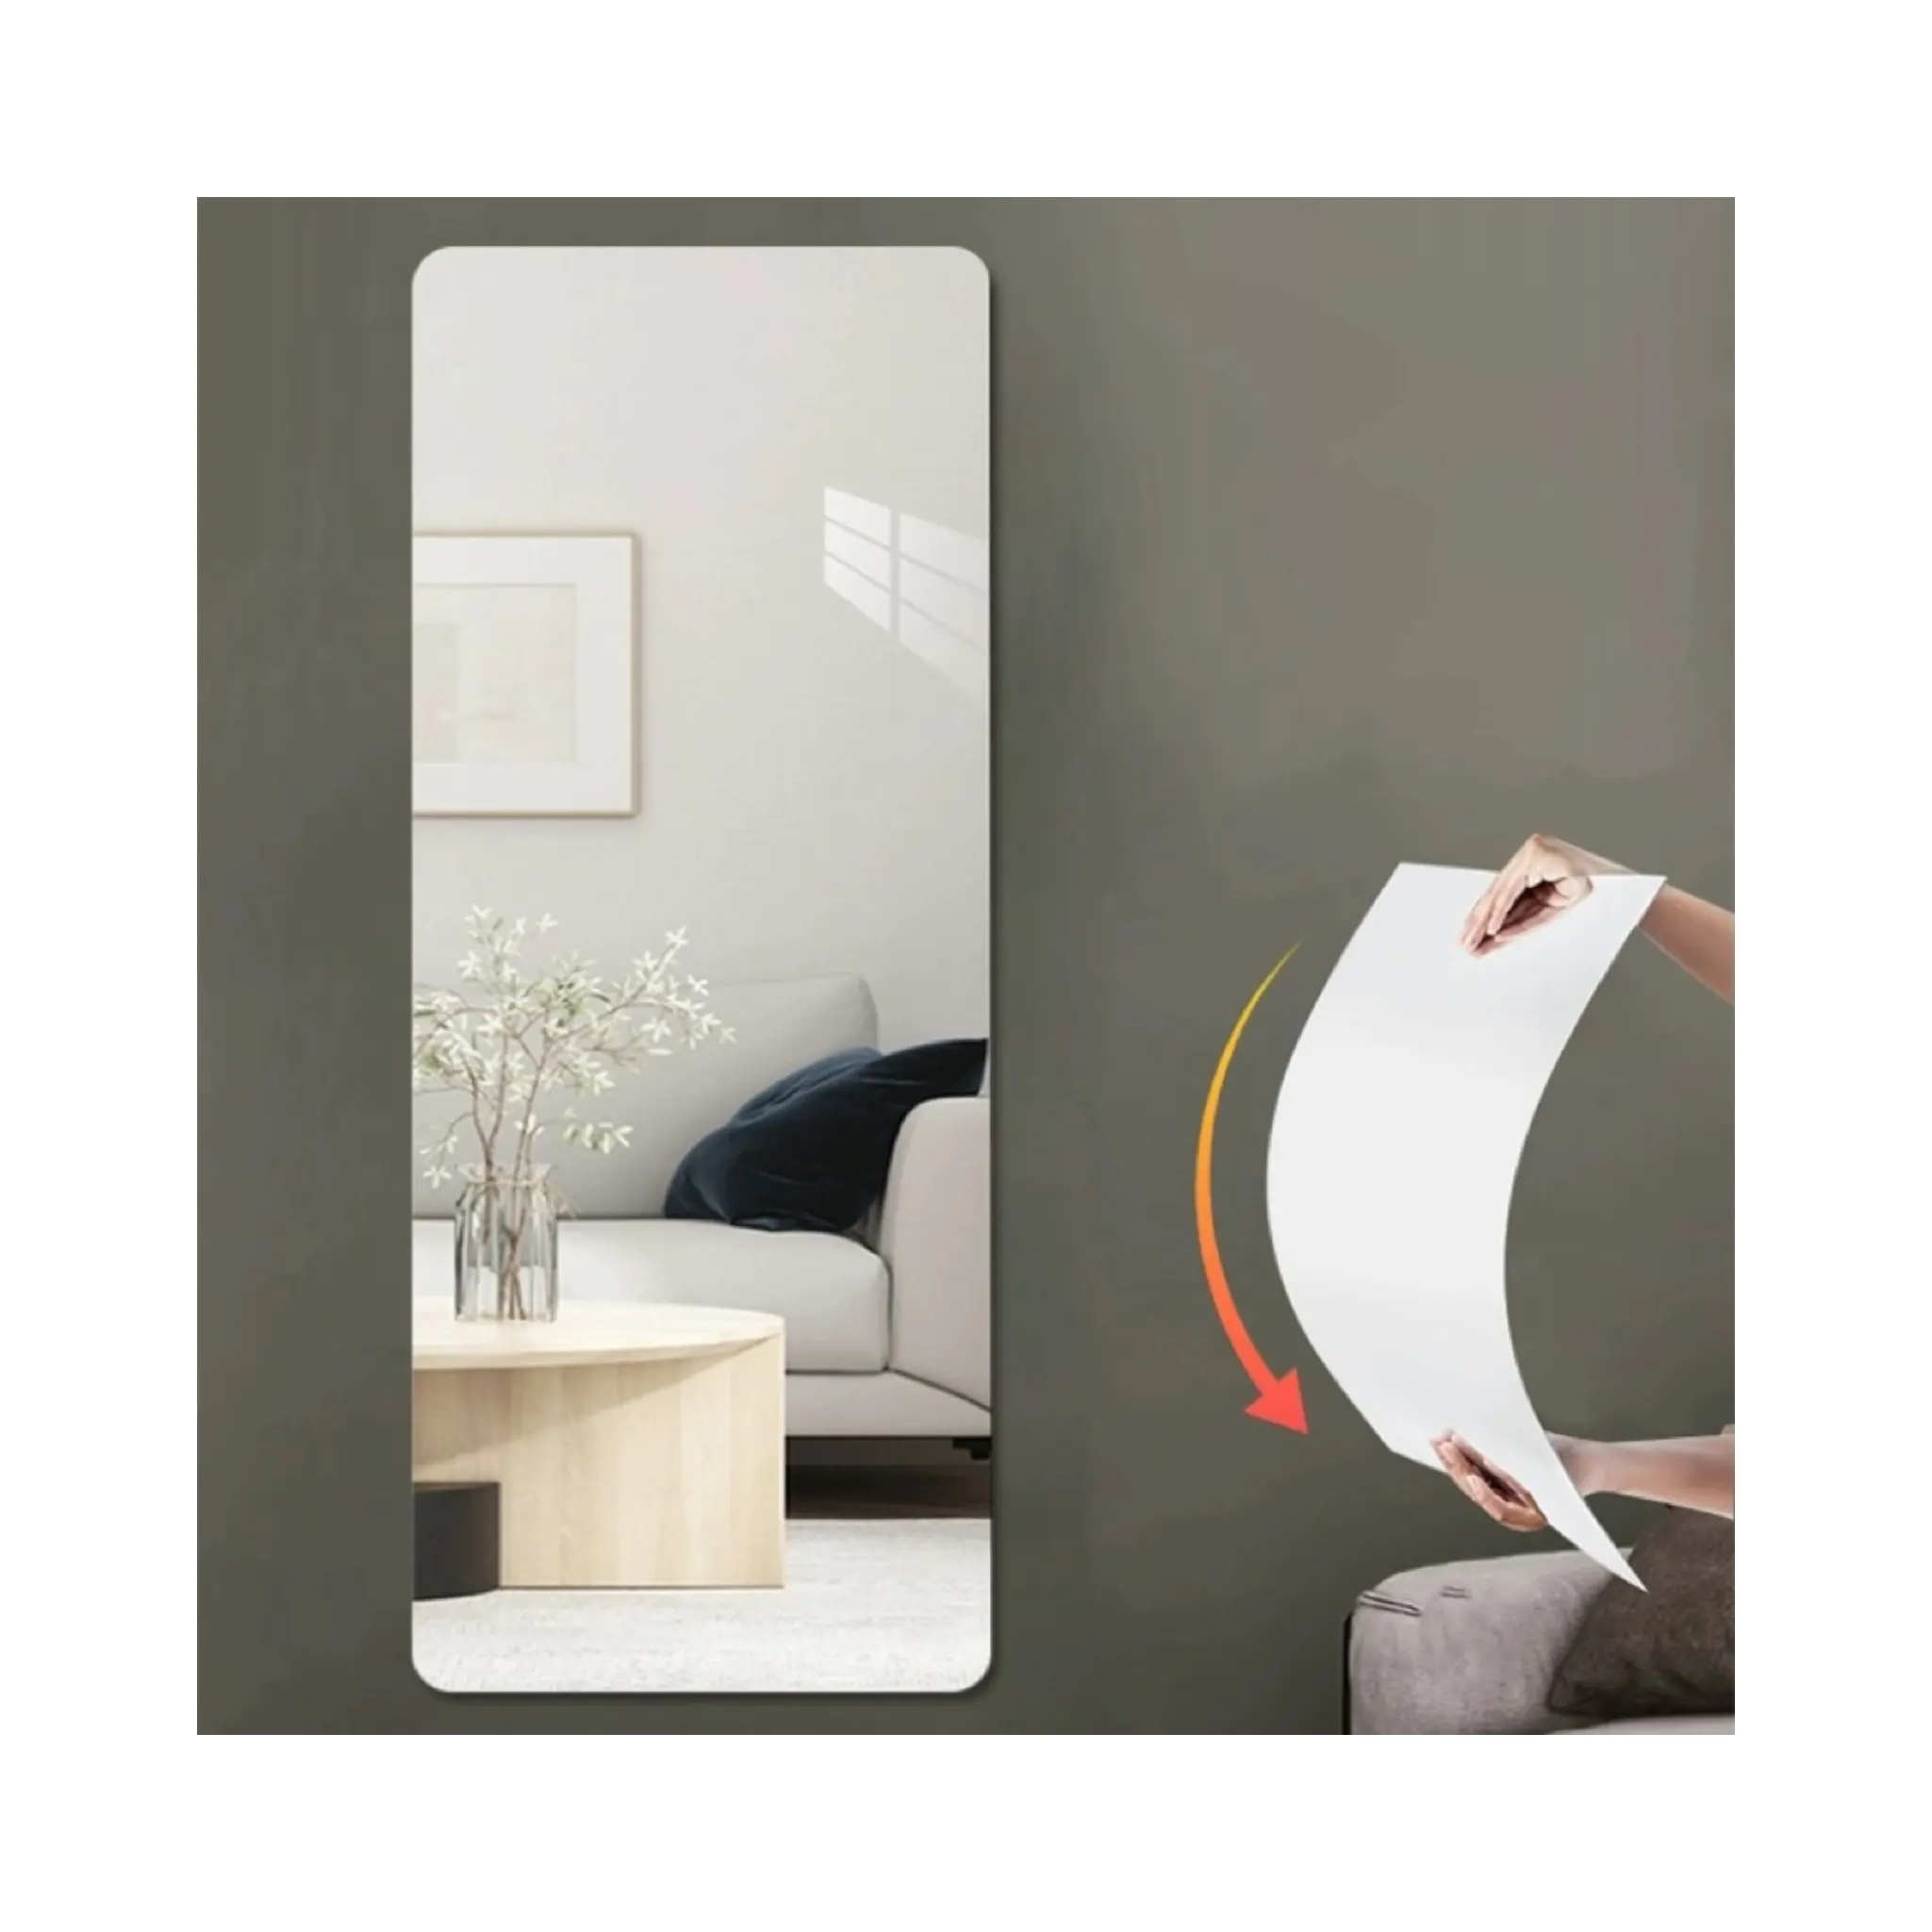 High definition Square Rectangle Waterproof Unbreakable Acrylic Mirror Sheet Wall Decor Full Length Adhesive Mirror